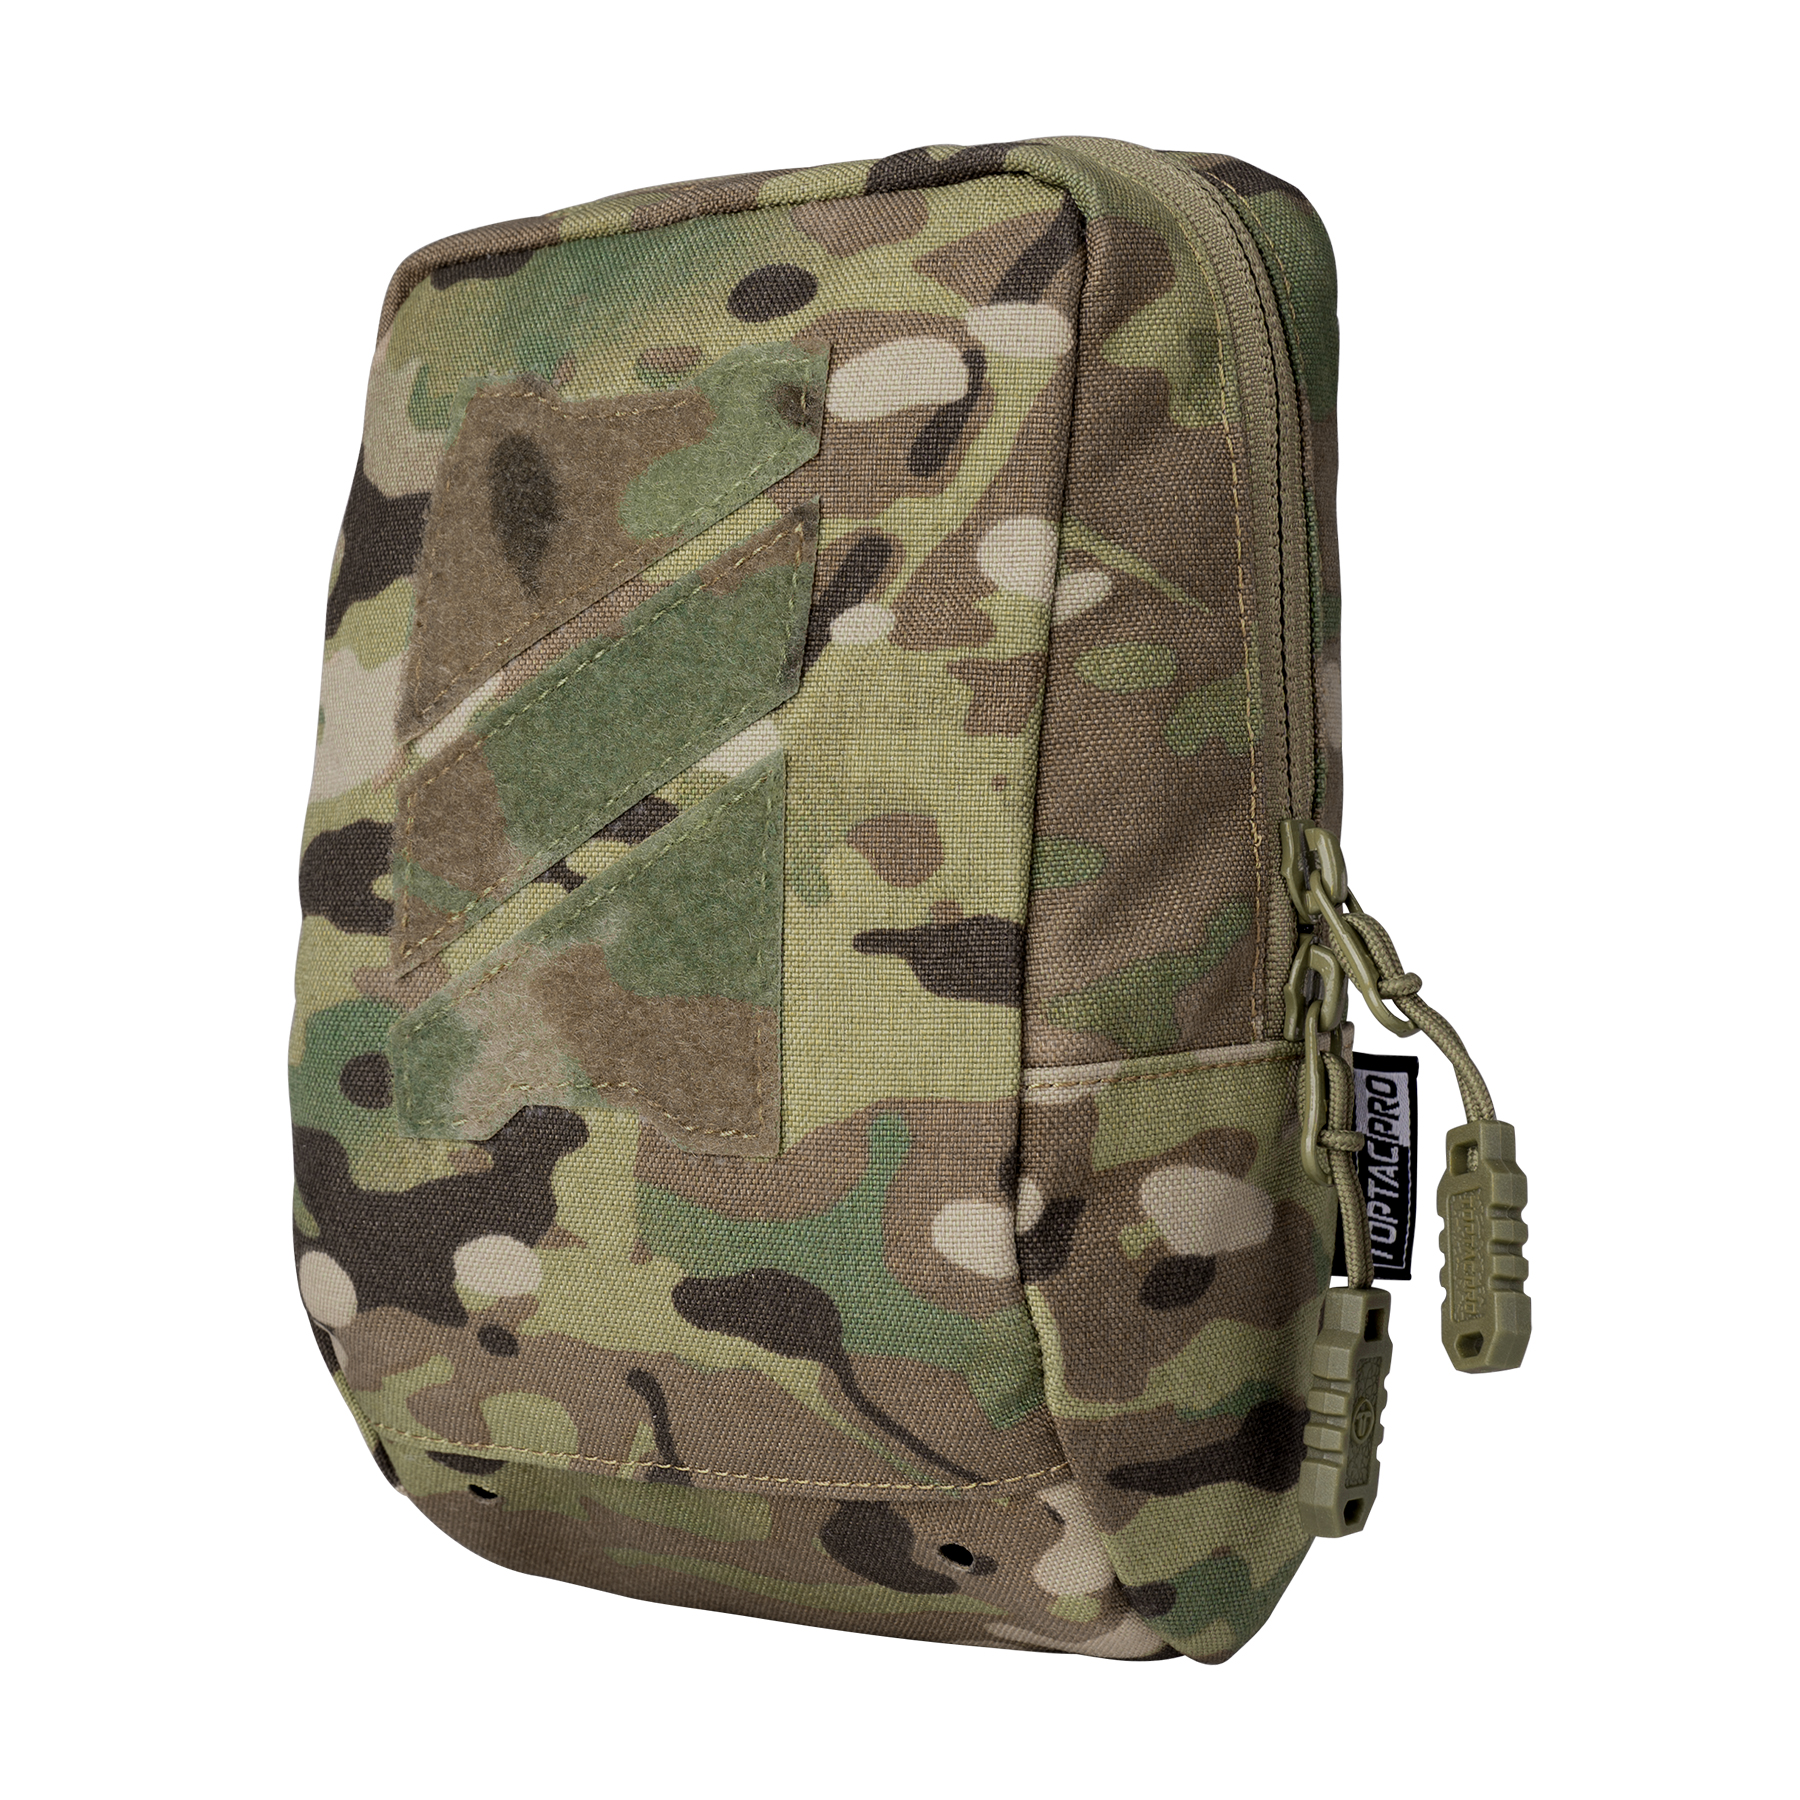 TOPTACPRO Tactical Pouch MOLLE Utility Pouch Military Duty Hunting 500D Cordura Nylon 8518-IDOGEAR INDUSTRIAL